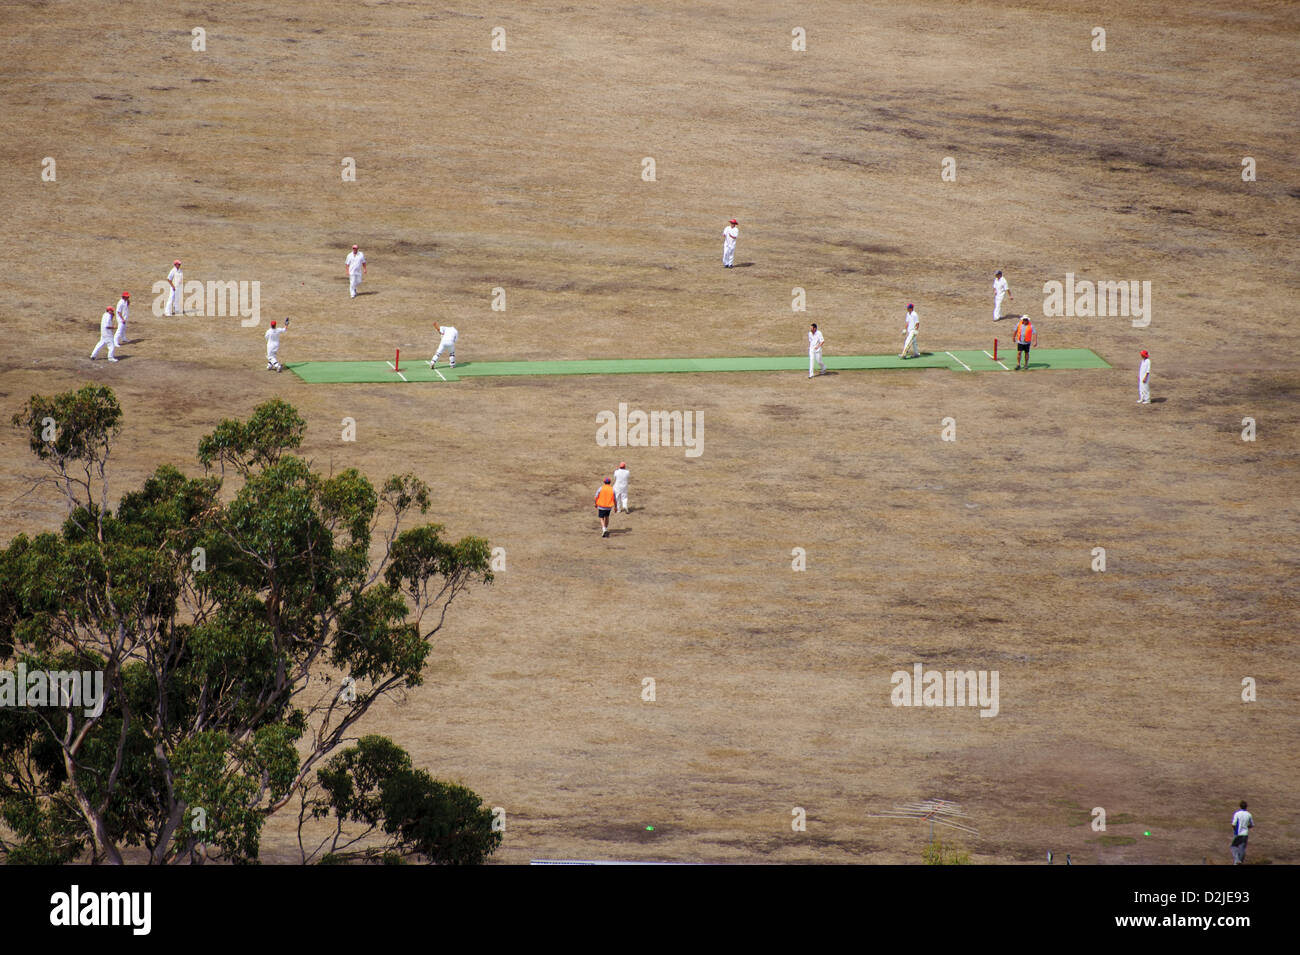 Ten years of drought takes its toll on the Hanging Rock Cricket ground Stock Photo